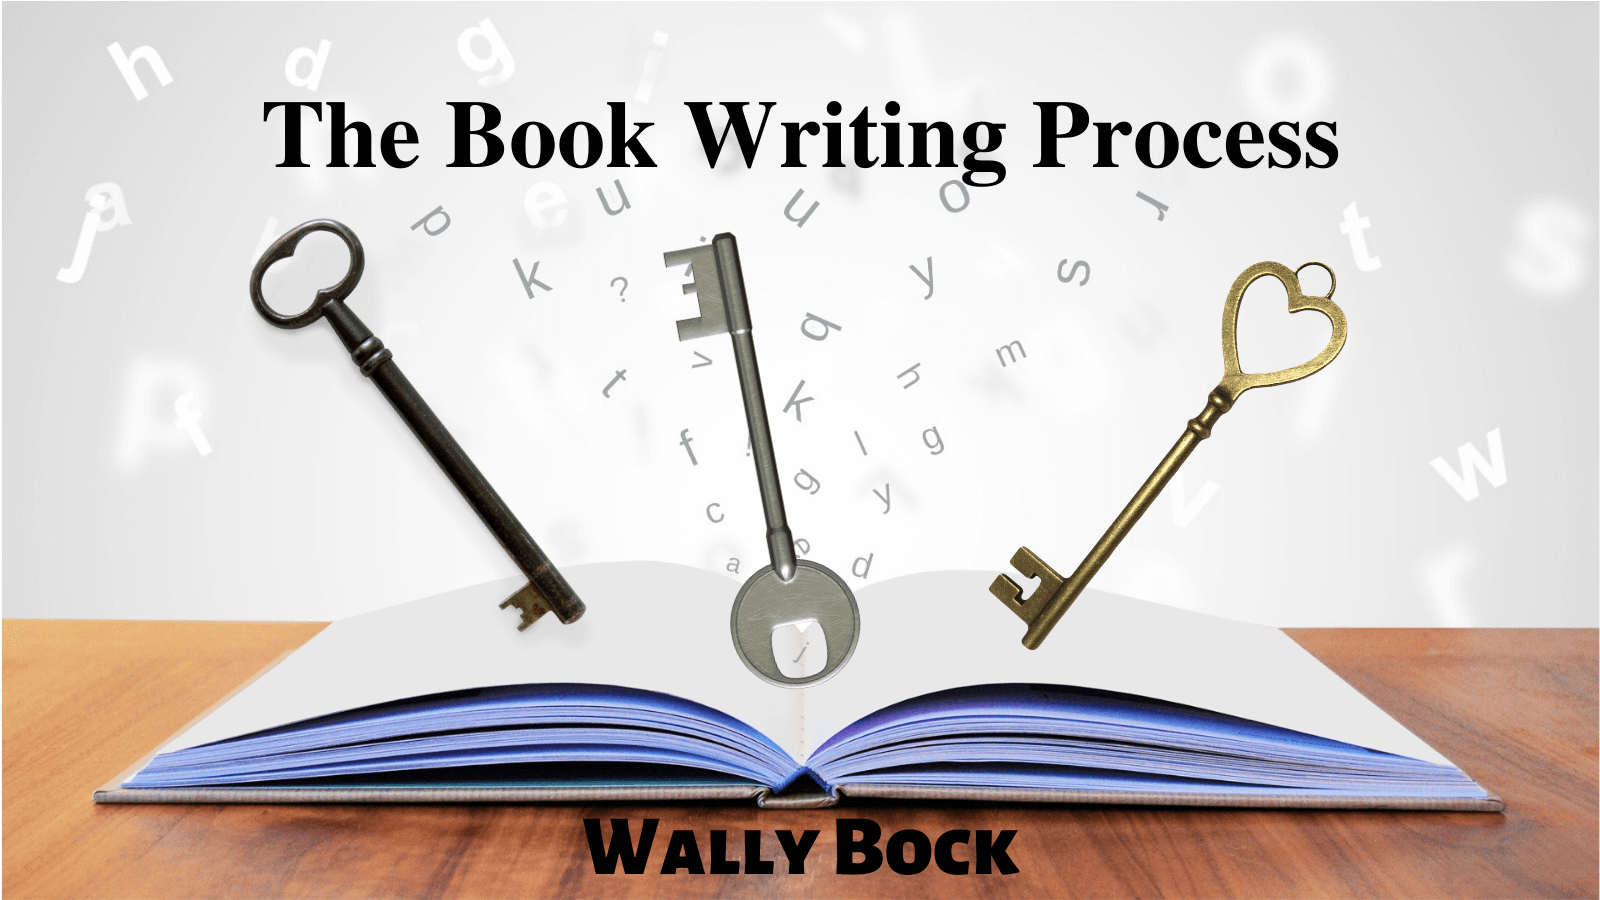 The Book Writing Process for Business Authors